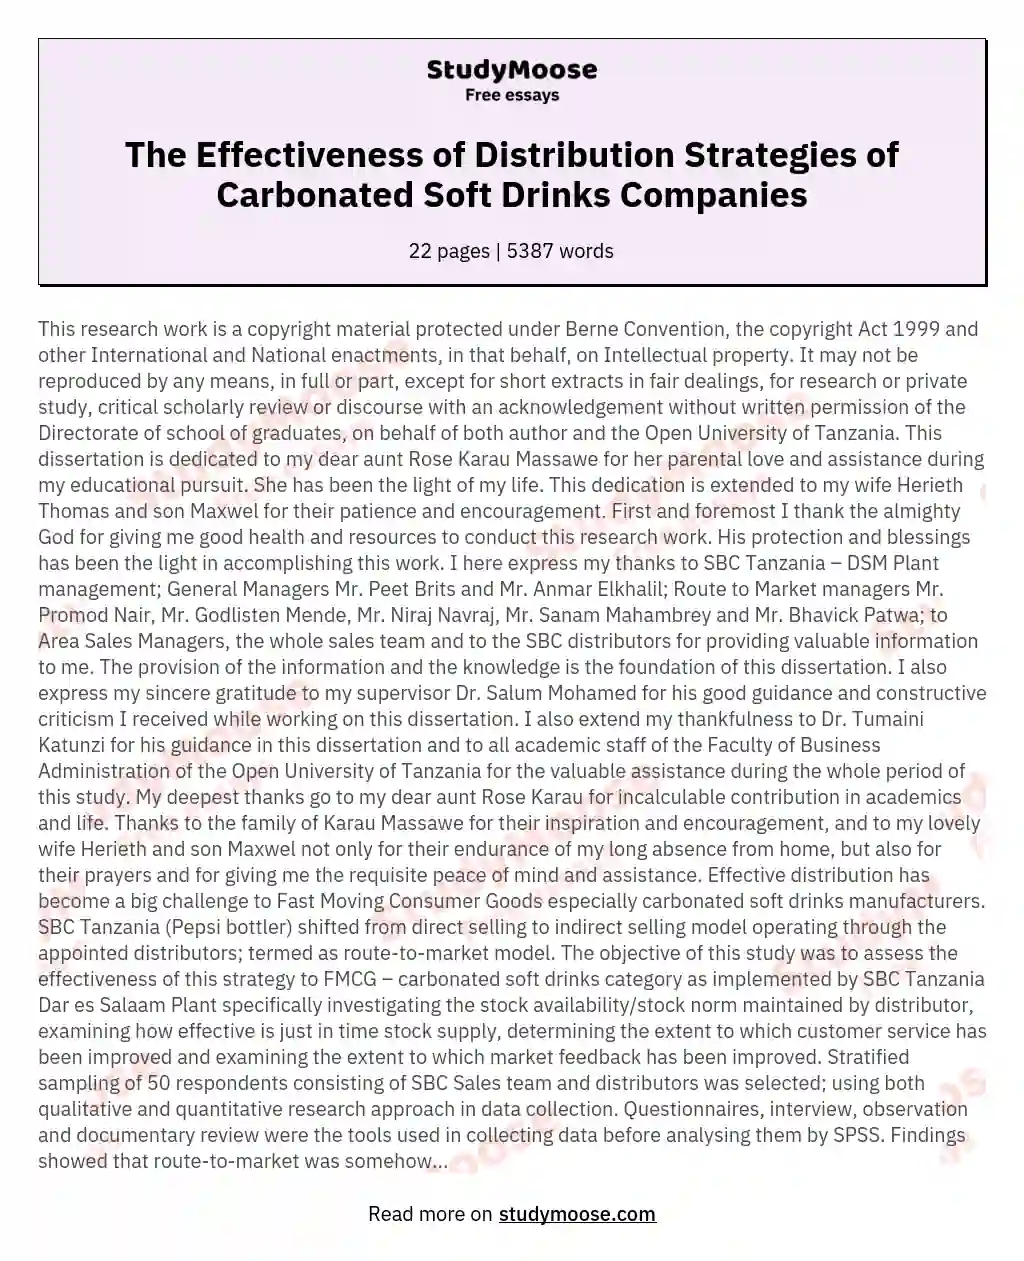 The Effectiveness of Distribution Strategies of Carbonated Soft Drinks Companies essay